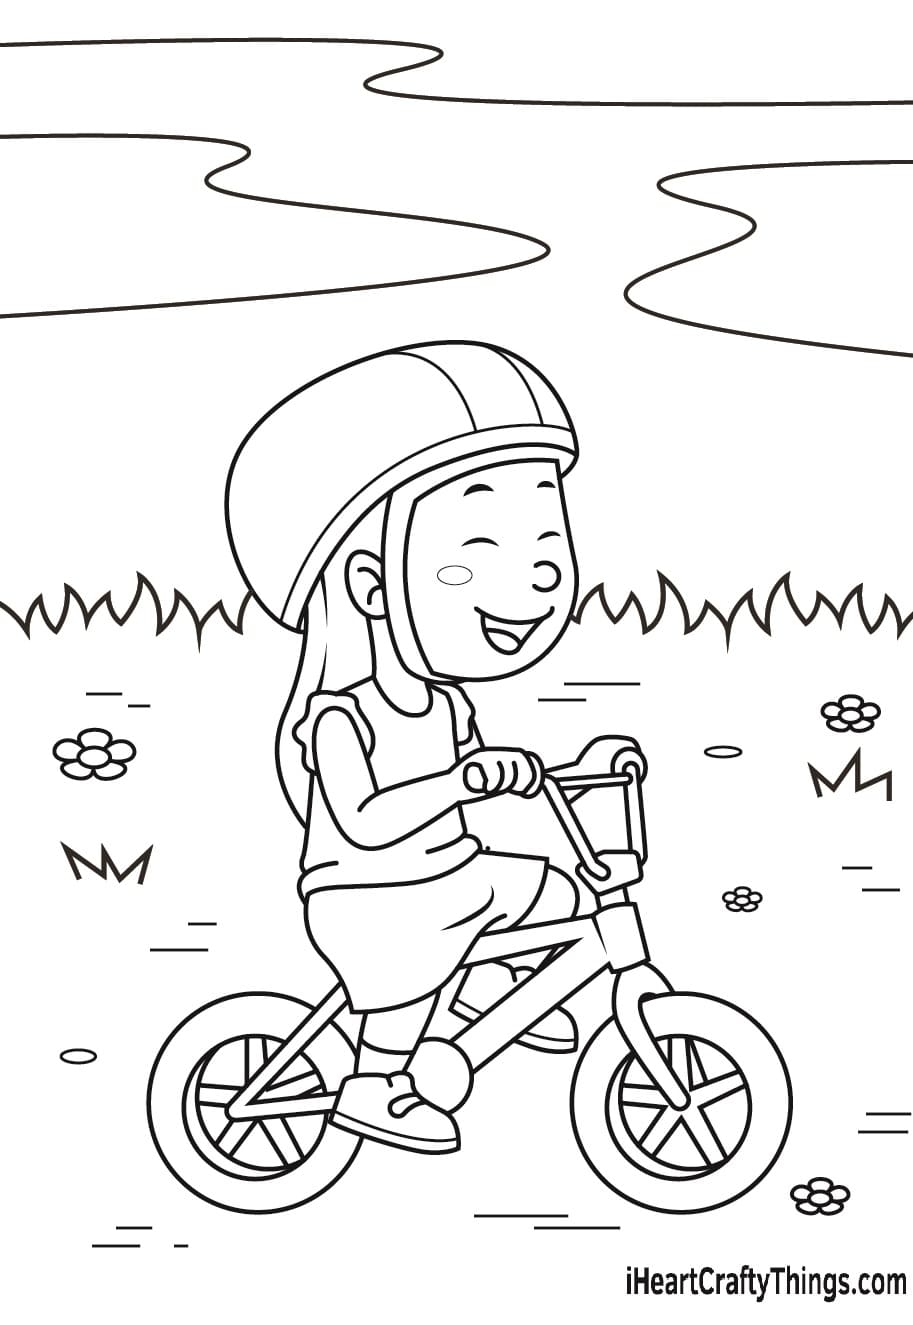 Cycling Image For Children Coloring Page